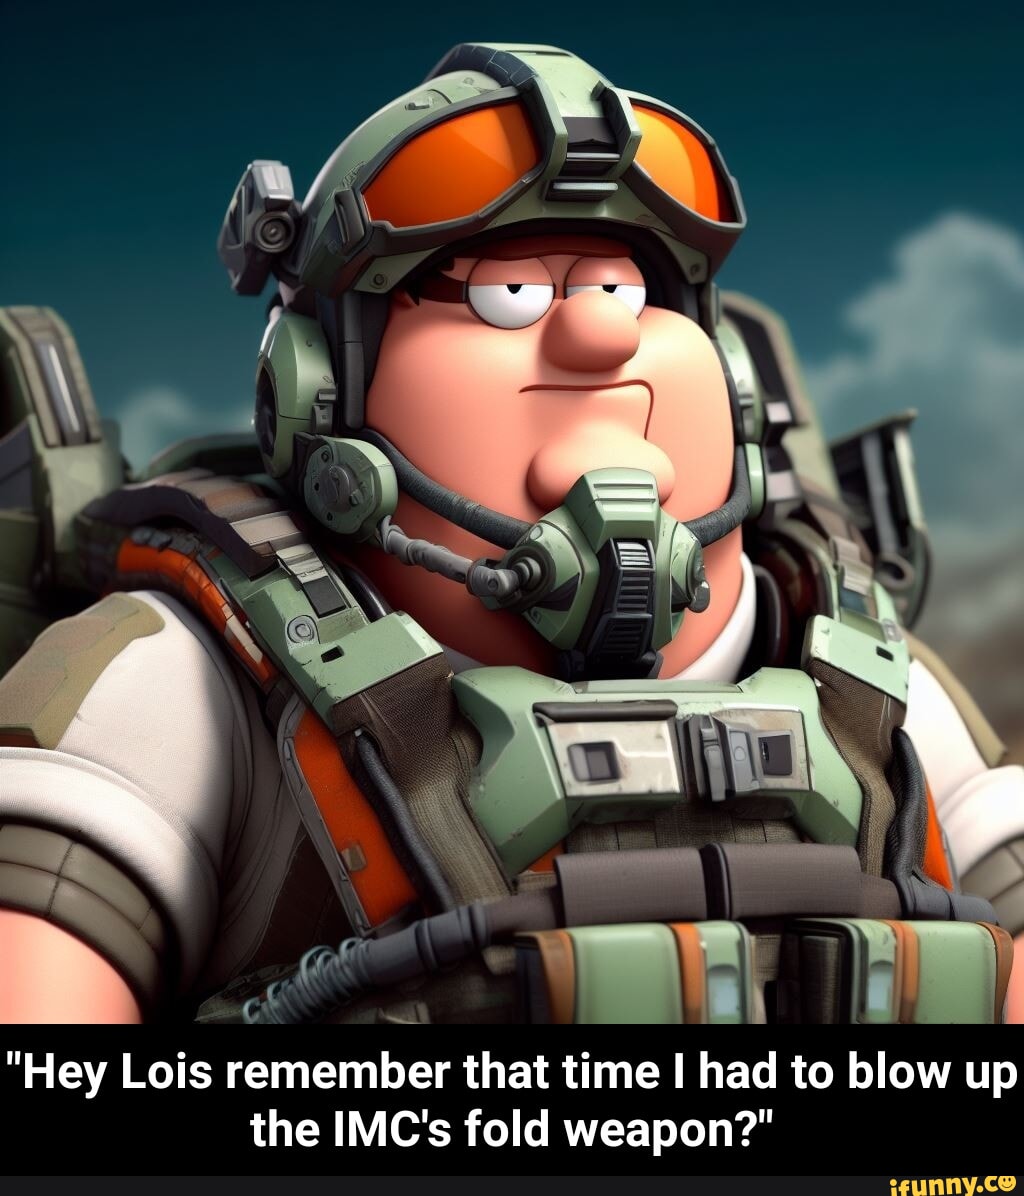 Hey Lois remember that time I had to blow up the IMC's fold weapon? - Hey  Lois remember that time I had to blow up the IMC's fold weapon? - iFunny  Brazil